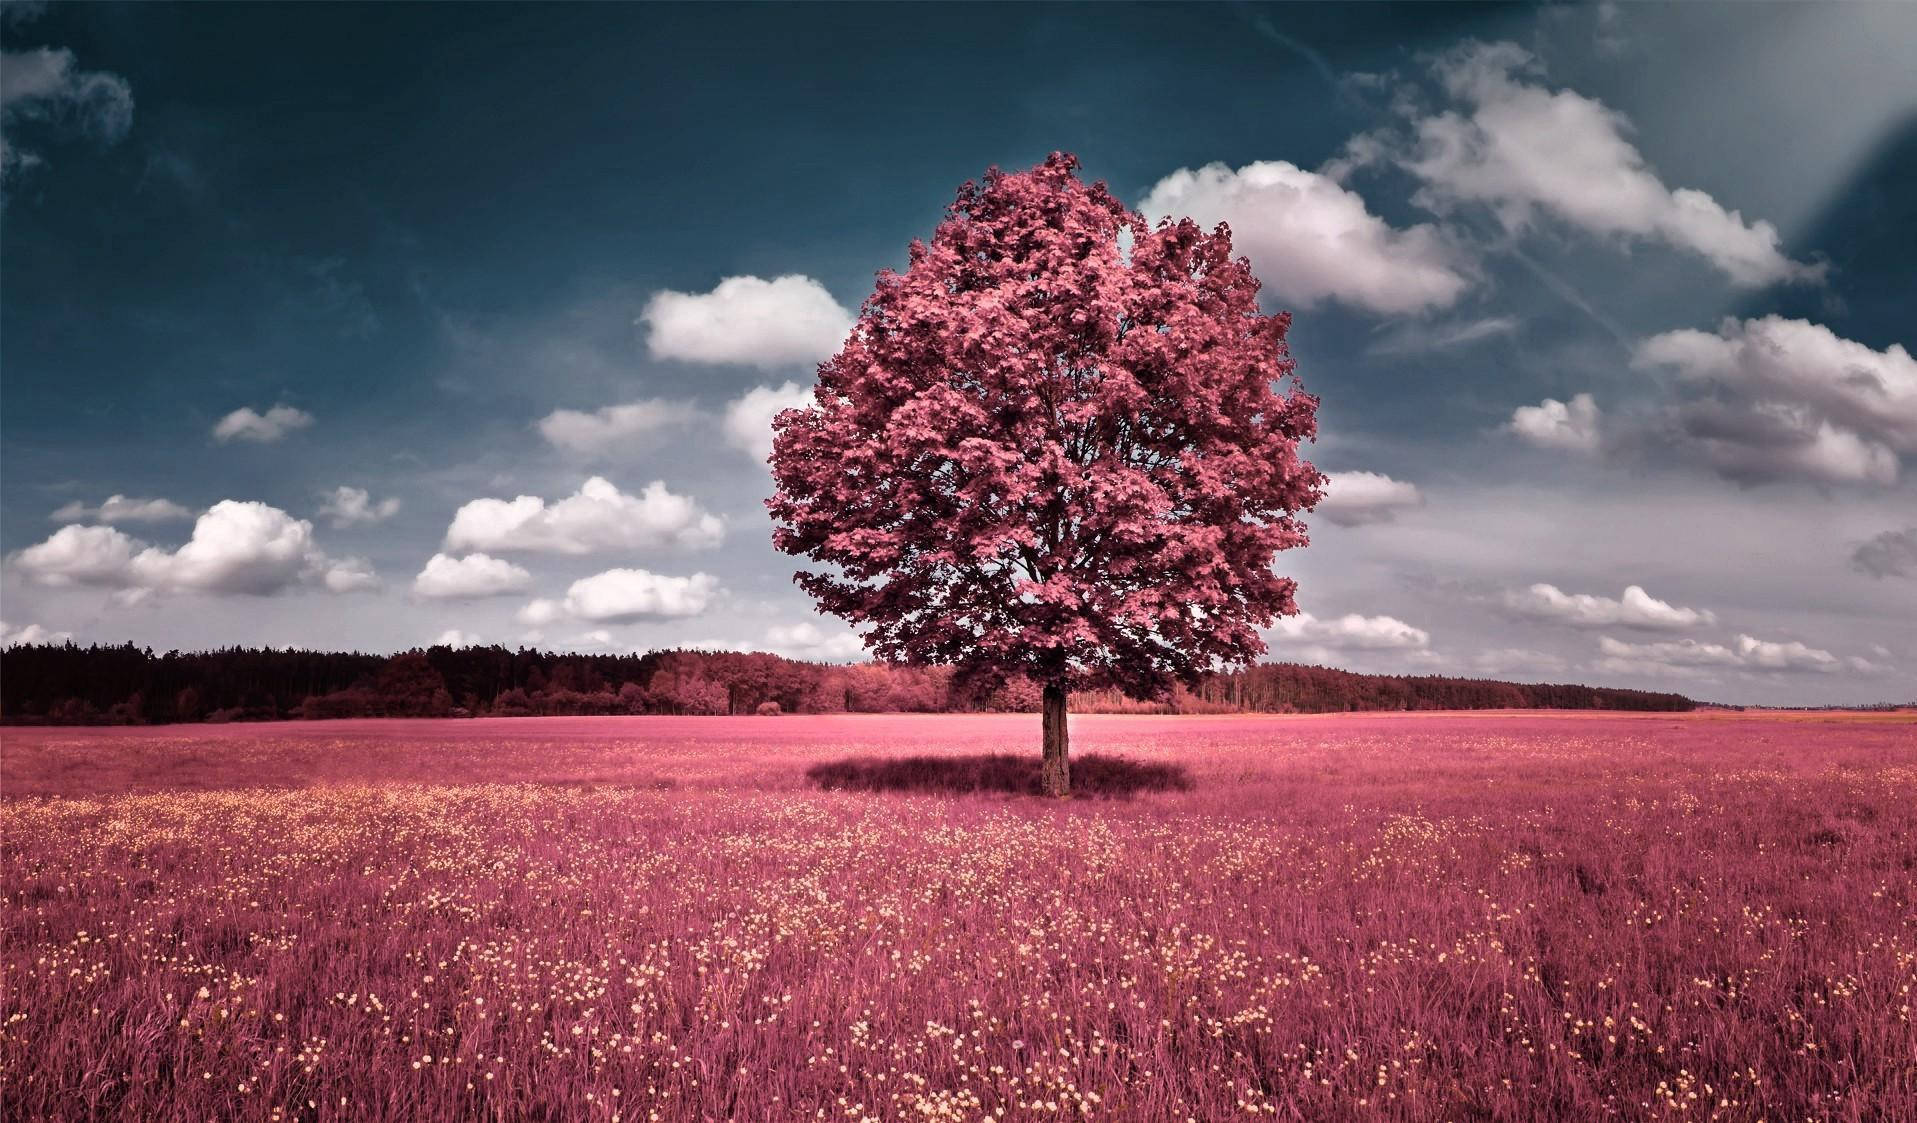 A beautiful pink tree surrounded by vibrant colors of nature Wallpaper